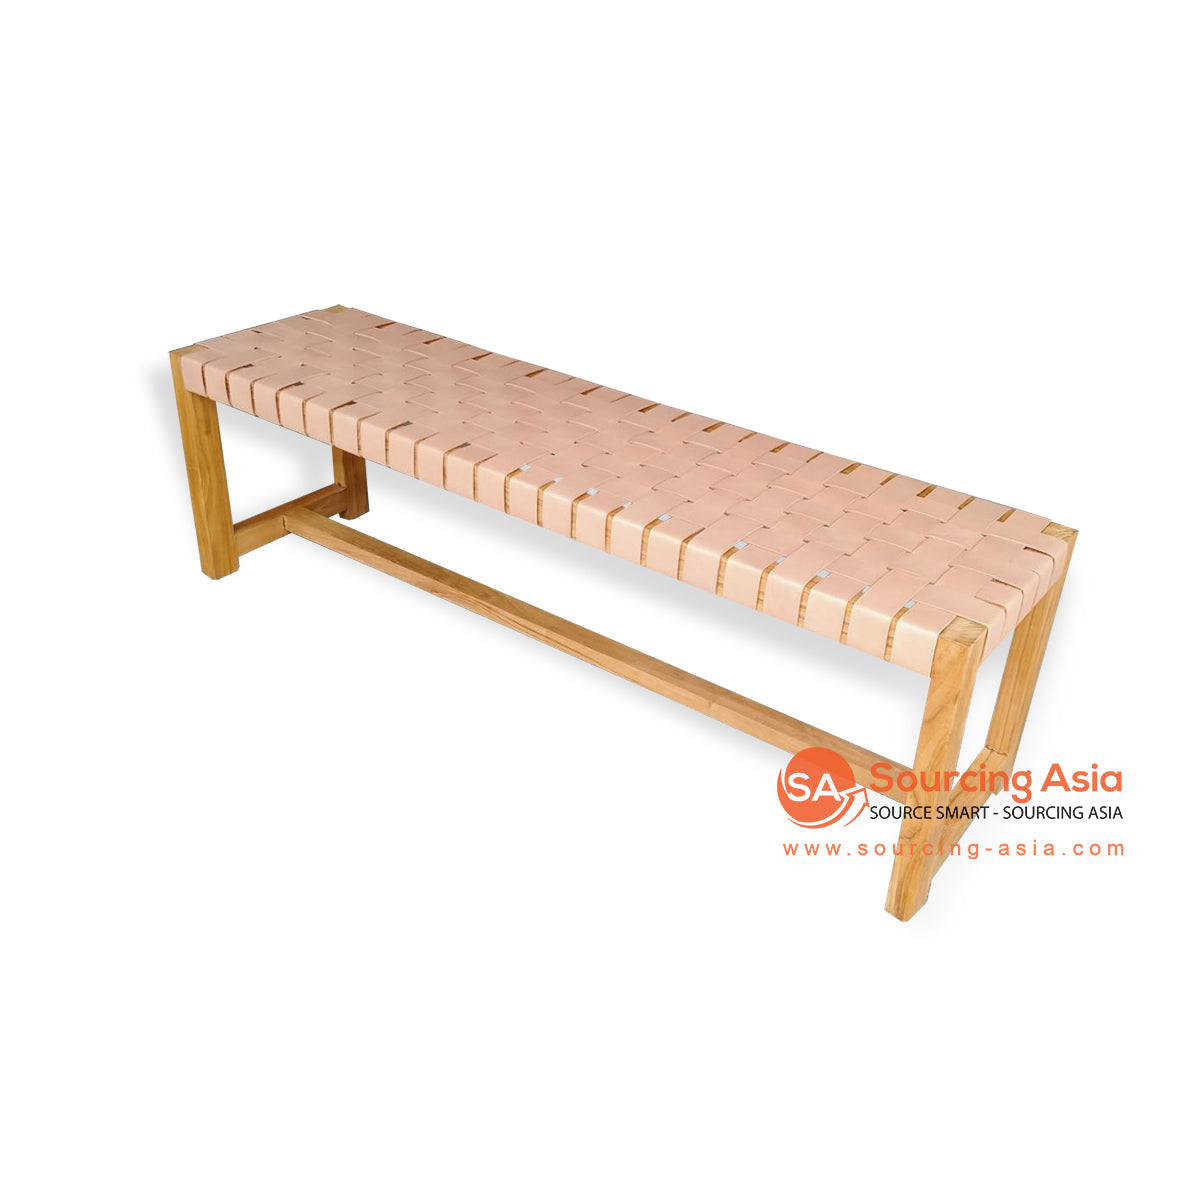 IJF019 NATURAL TEAK WOOD AND WOVEN LEATHER BED END BENCH